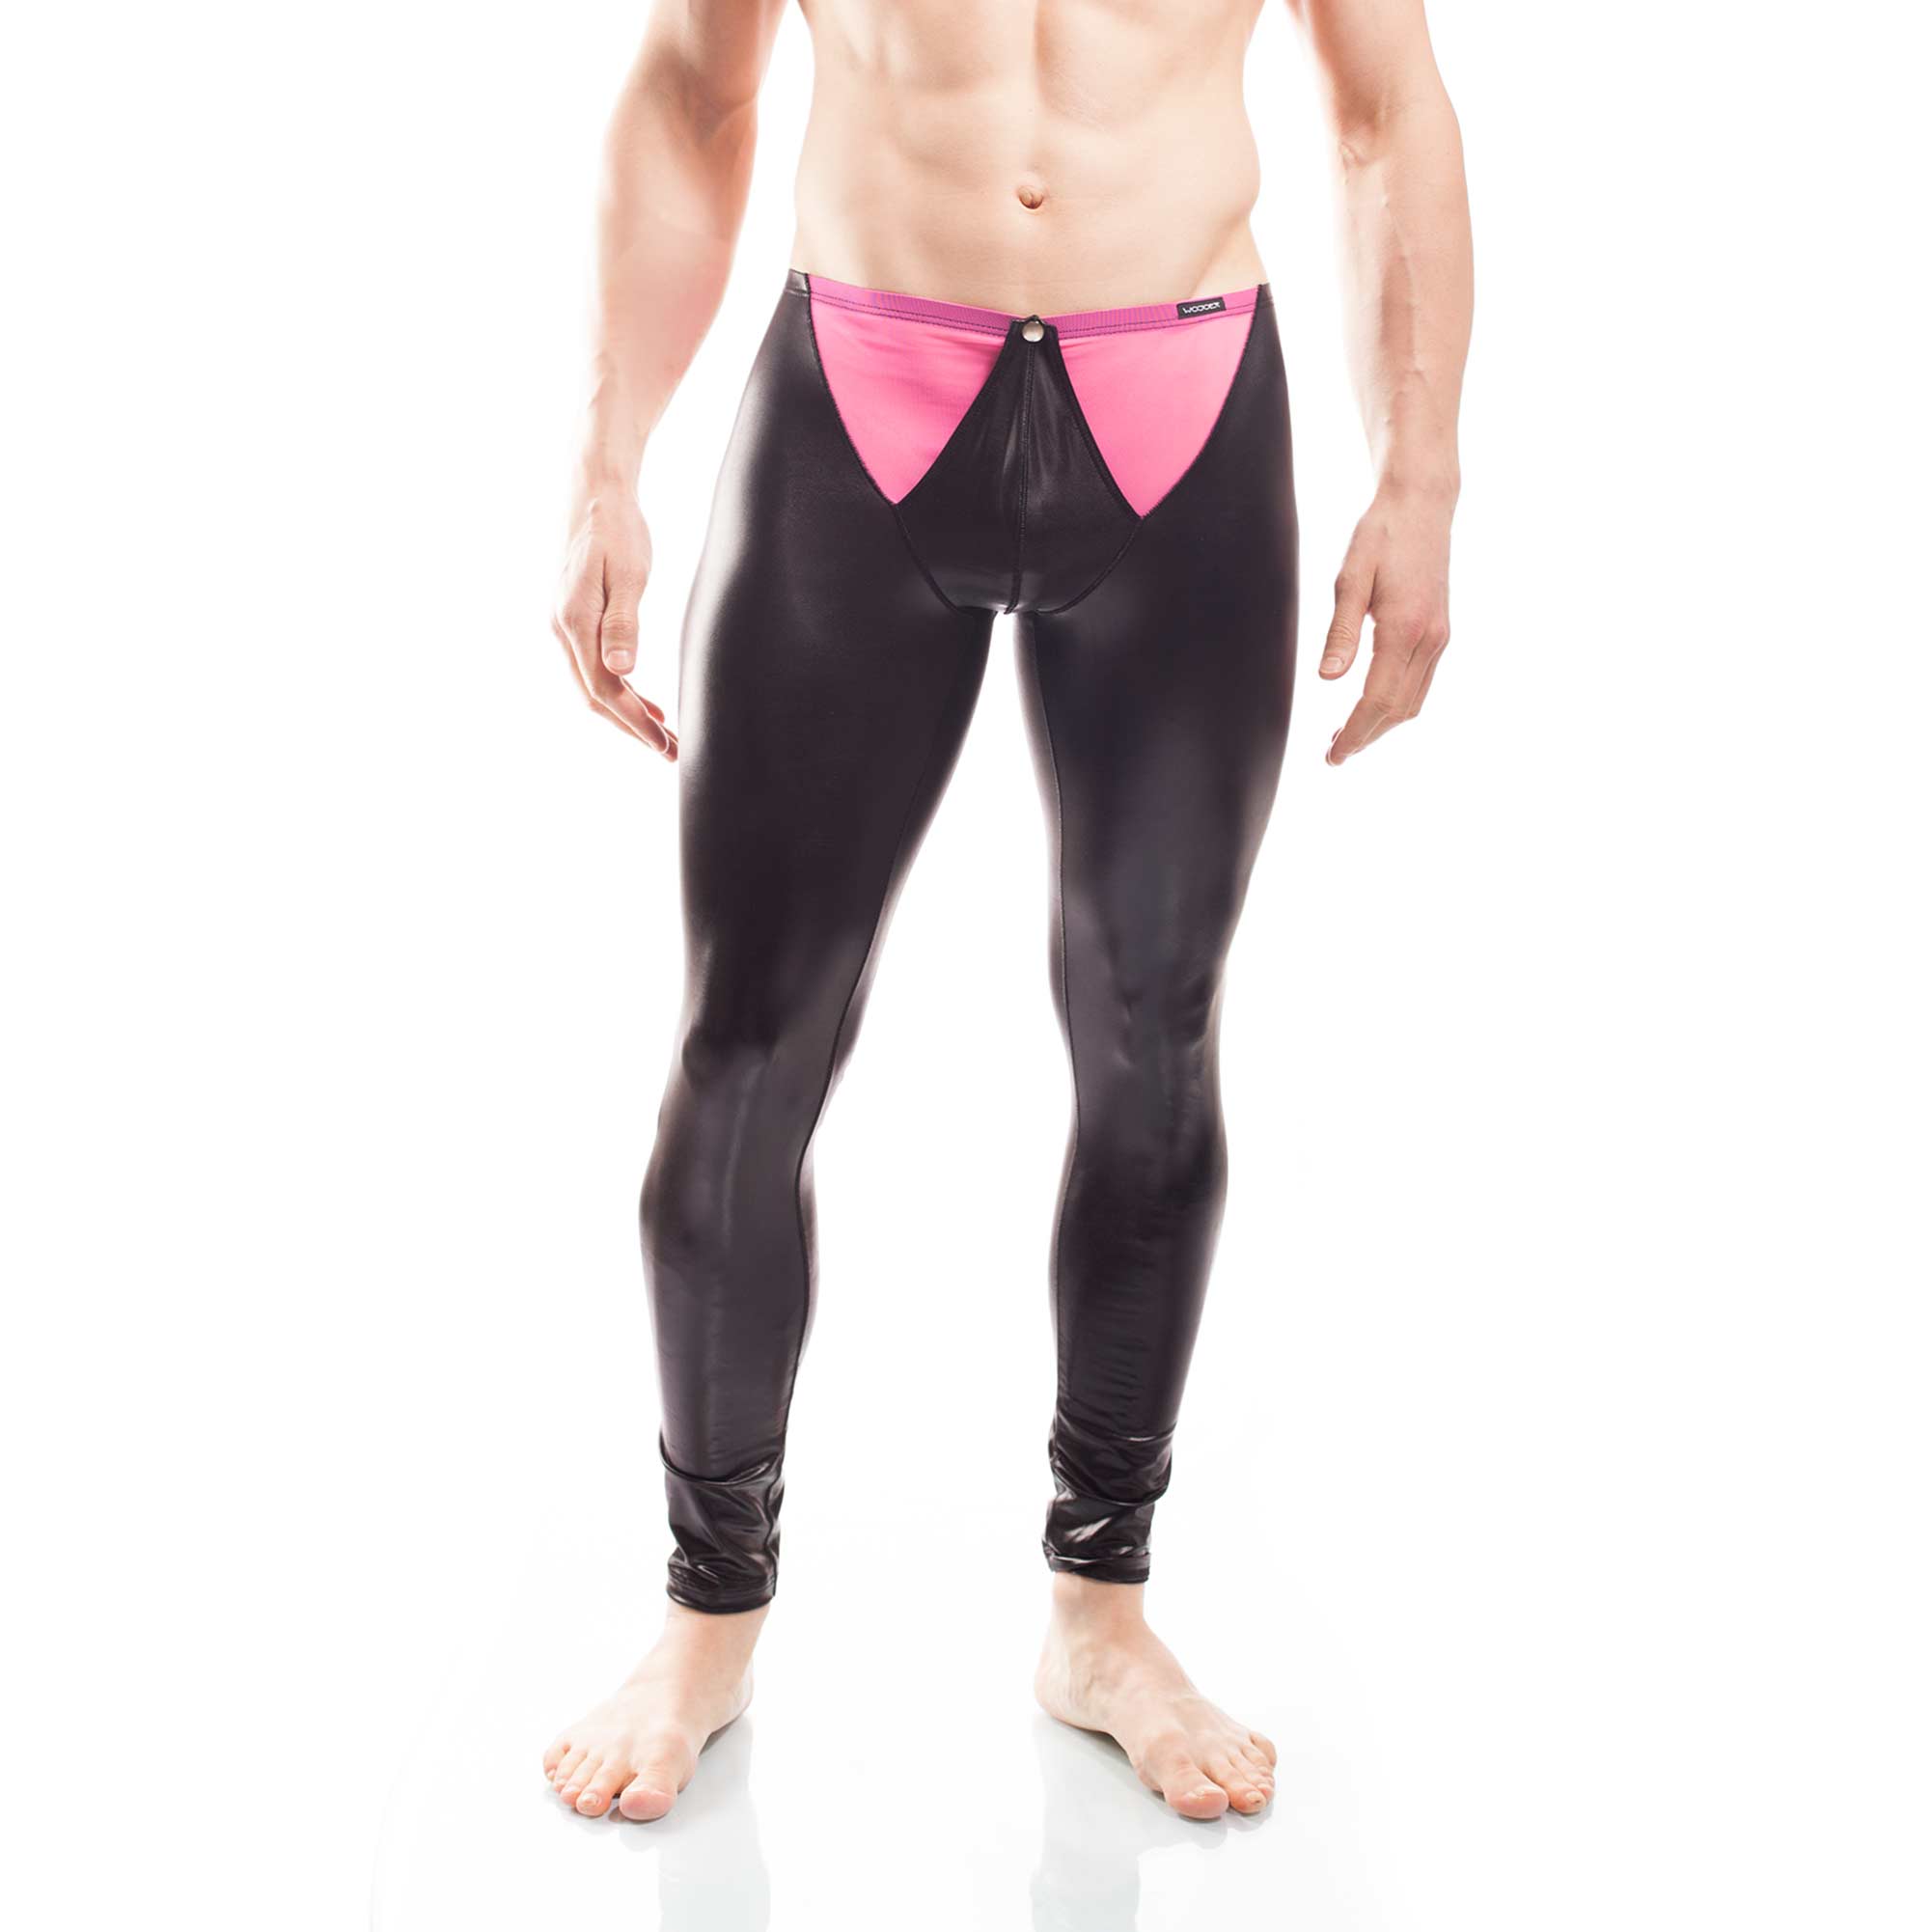 The Pink Panther Leggings 329W415 belongs to the Wojoer LIVE products. Production on order only. So we can respond to customer requests individually.
Size
Available in sizes S, M, L, XL
Material composition
Wet material: 60% polyurethane,  3% elasthane 37%polyester

powernet: 94% Polyester, 6% elasthane
Particularities
LIVE-Produkt…